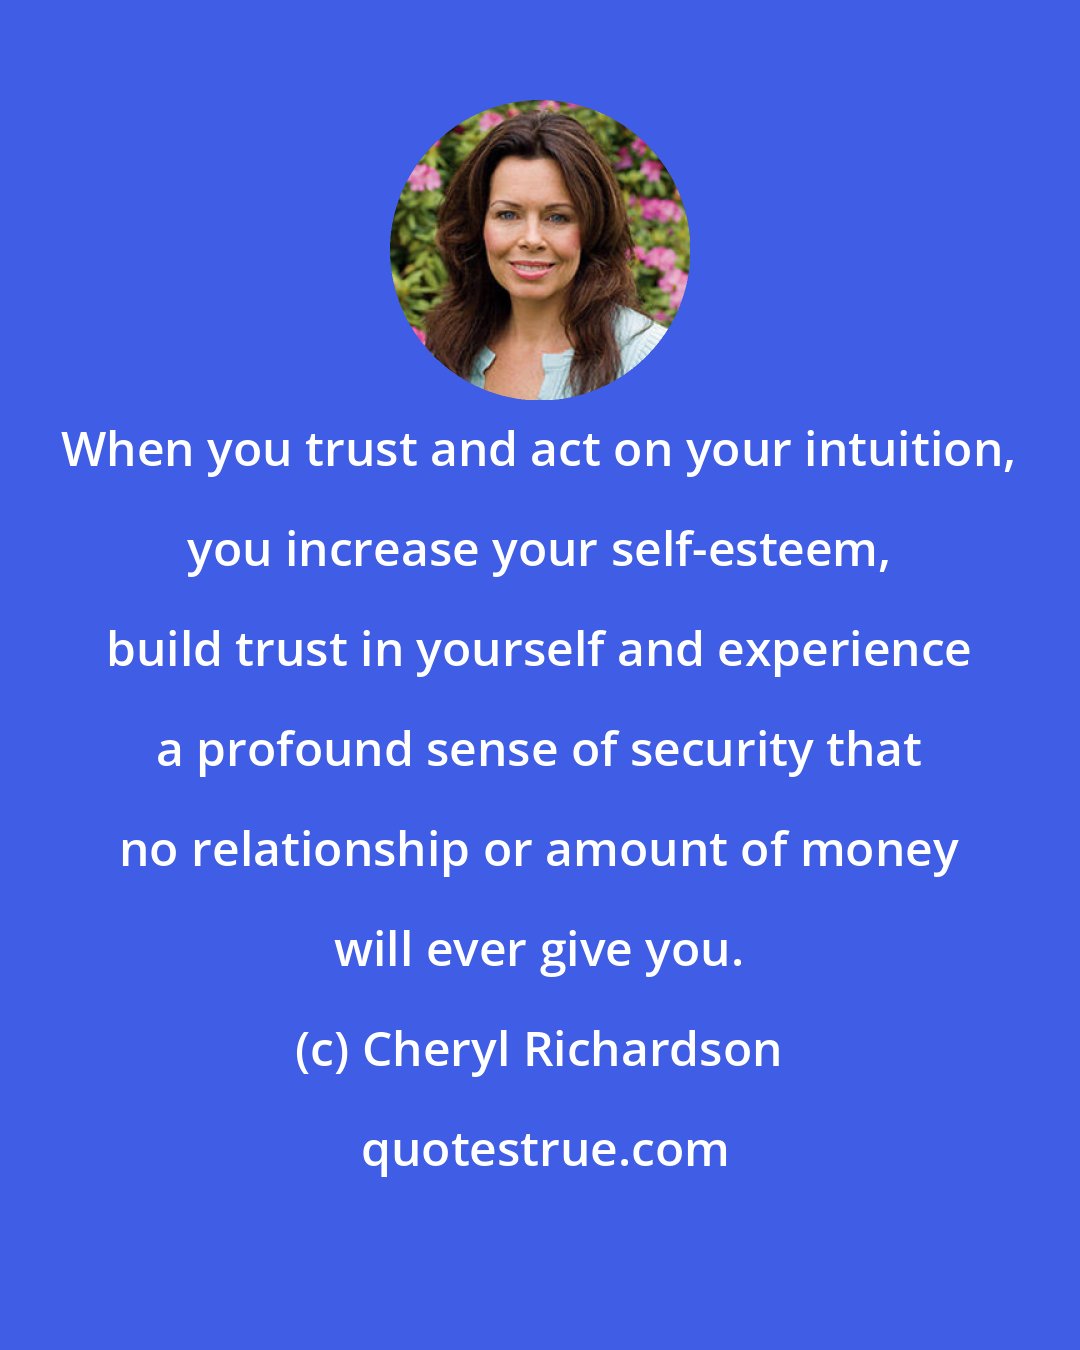 Cheryl Richardson: When you trust and act on your intuition, you increase your self-esteem, build trust in yourself and experience a profound sense of security that no relationship or amount of money will ever give you.